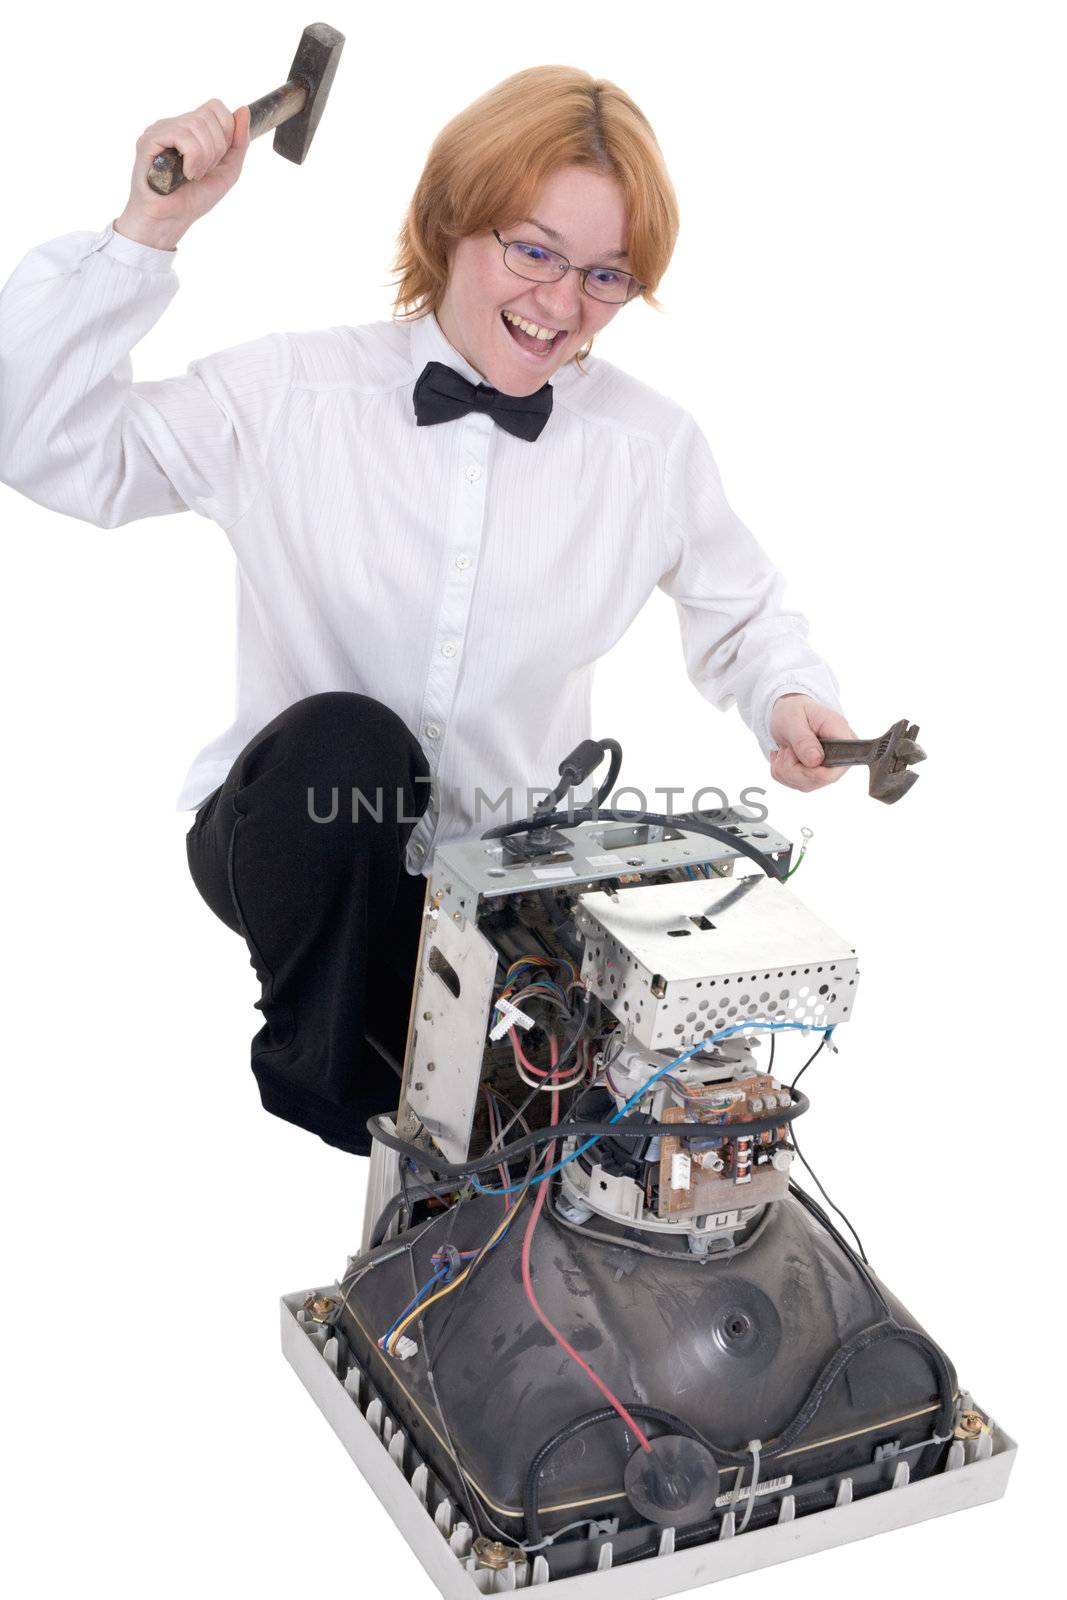 The girl repairing the old electronic equipment